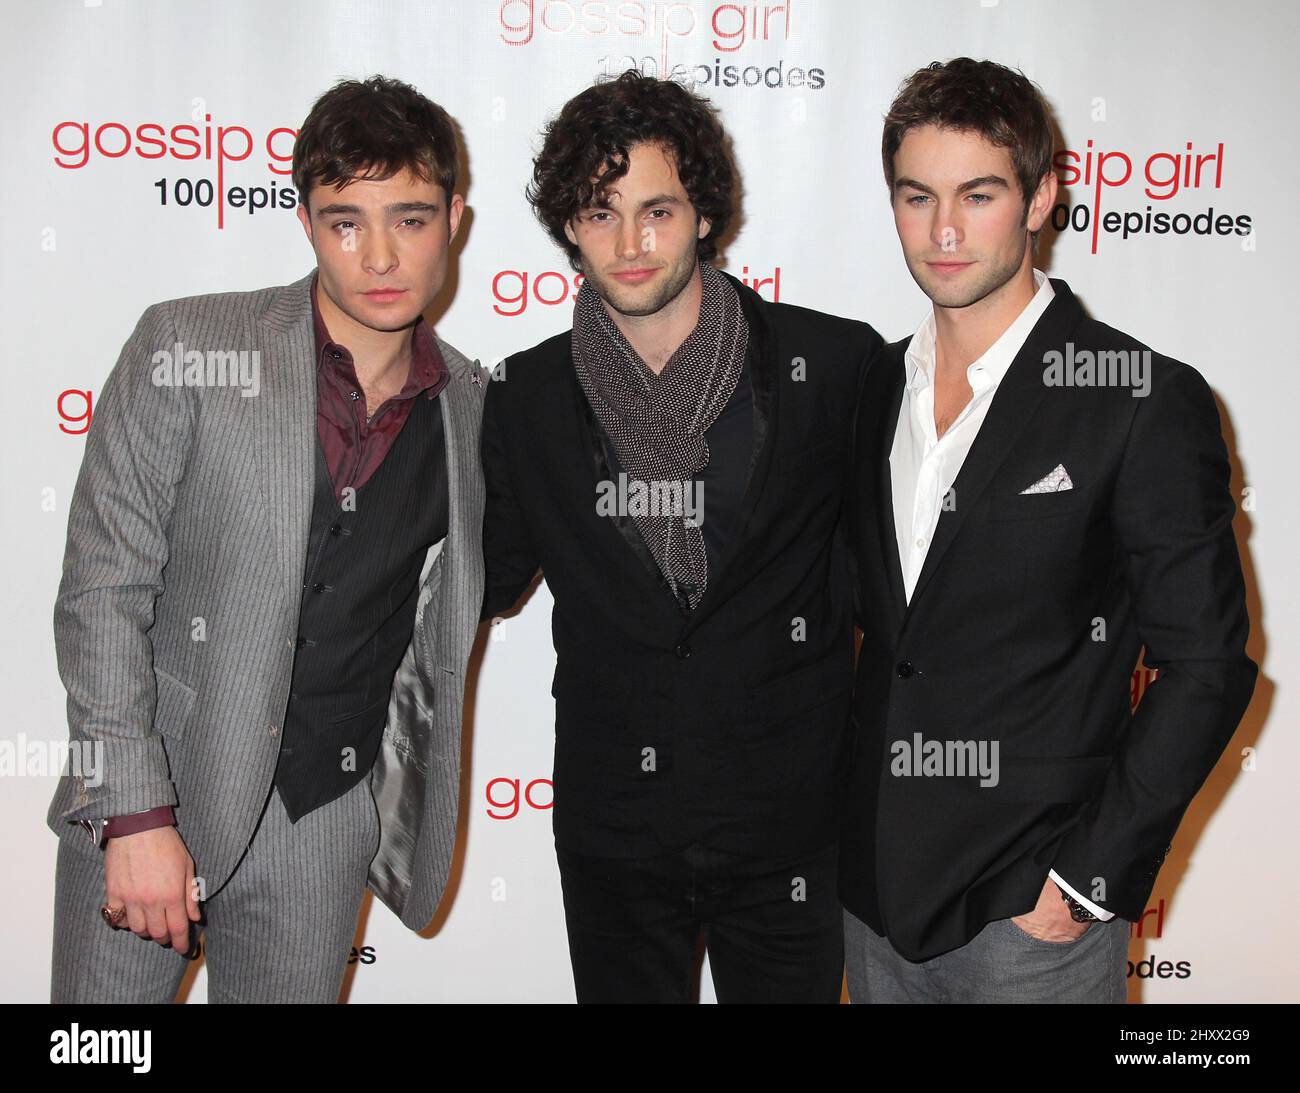 Penn Badgley, Ed Westwick and Chace Crawford at the 'Gossip Girl' 100th episode celebration at Cipriani Wall Street in New York Stock Photo